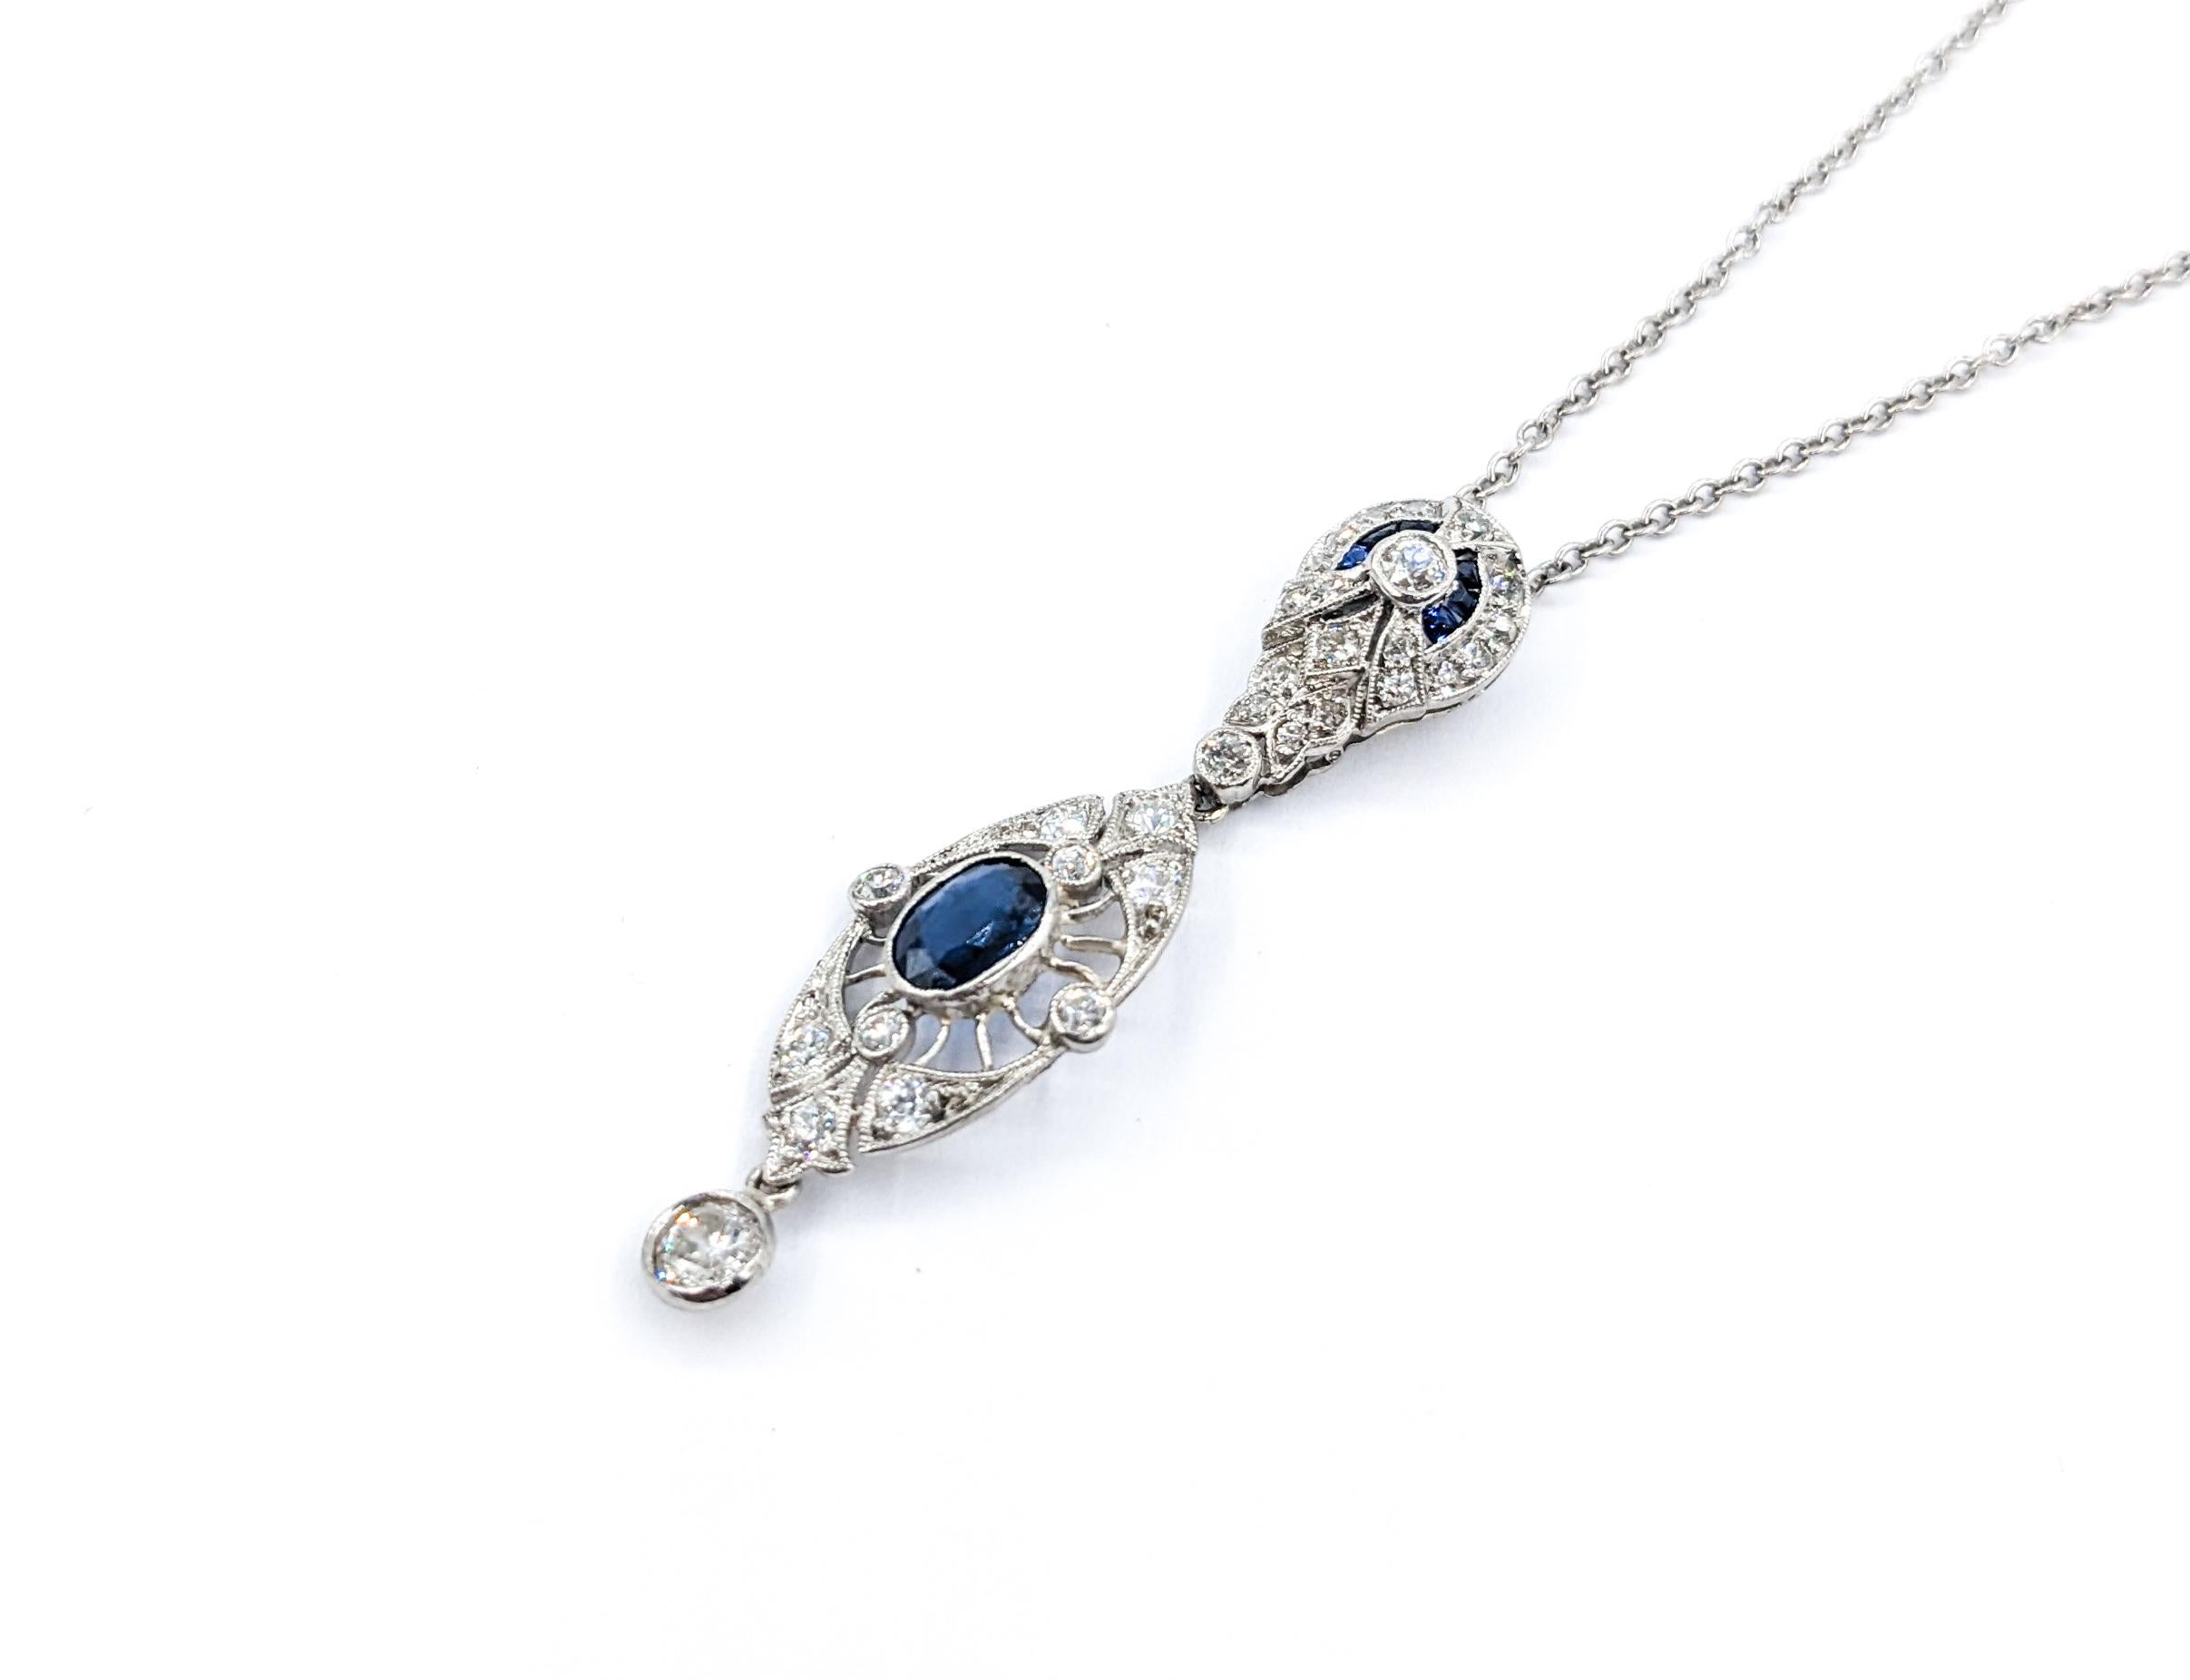 Antique Art Deco 1.15ctw Sapphire & Diamond Necklace In White Gold

Introducing this exquisite Antique Art Deco Necklace, meticulously crafted in 14kt White Gold. This captivating piece showcases .76ctw of Old European Diamonds paired with Antique